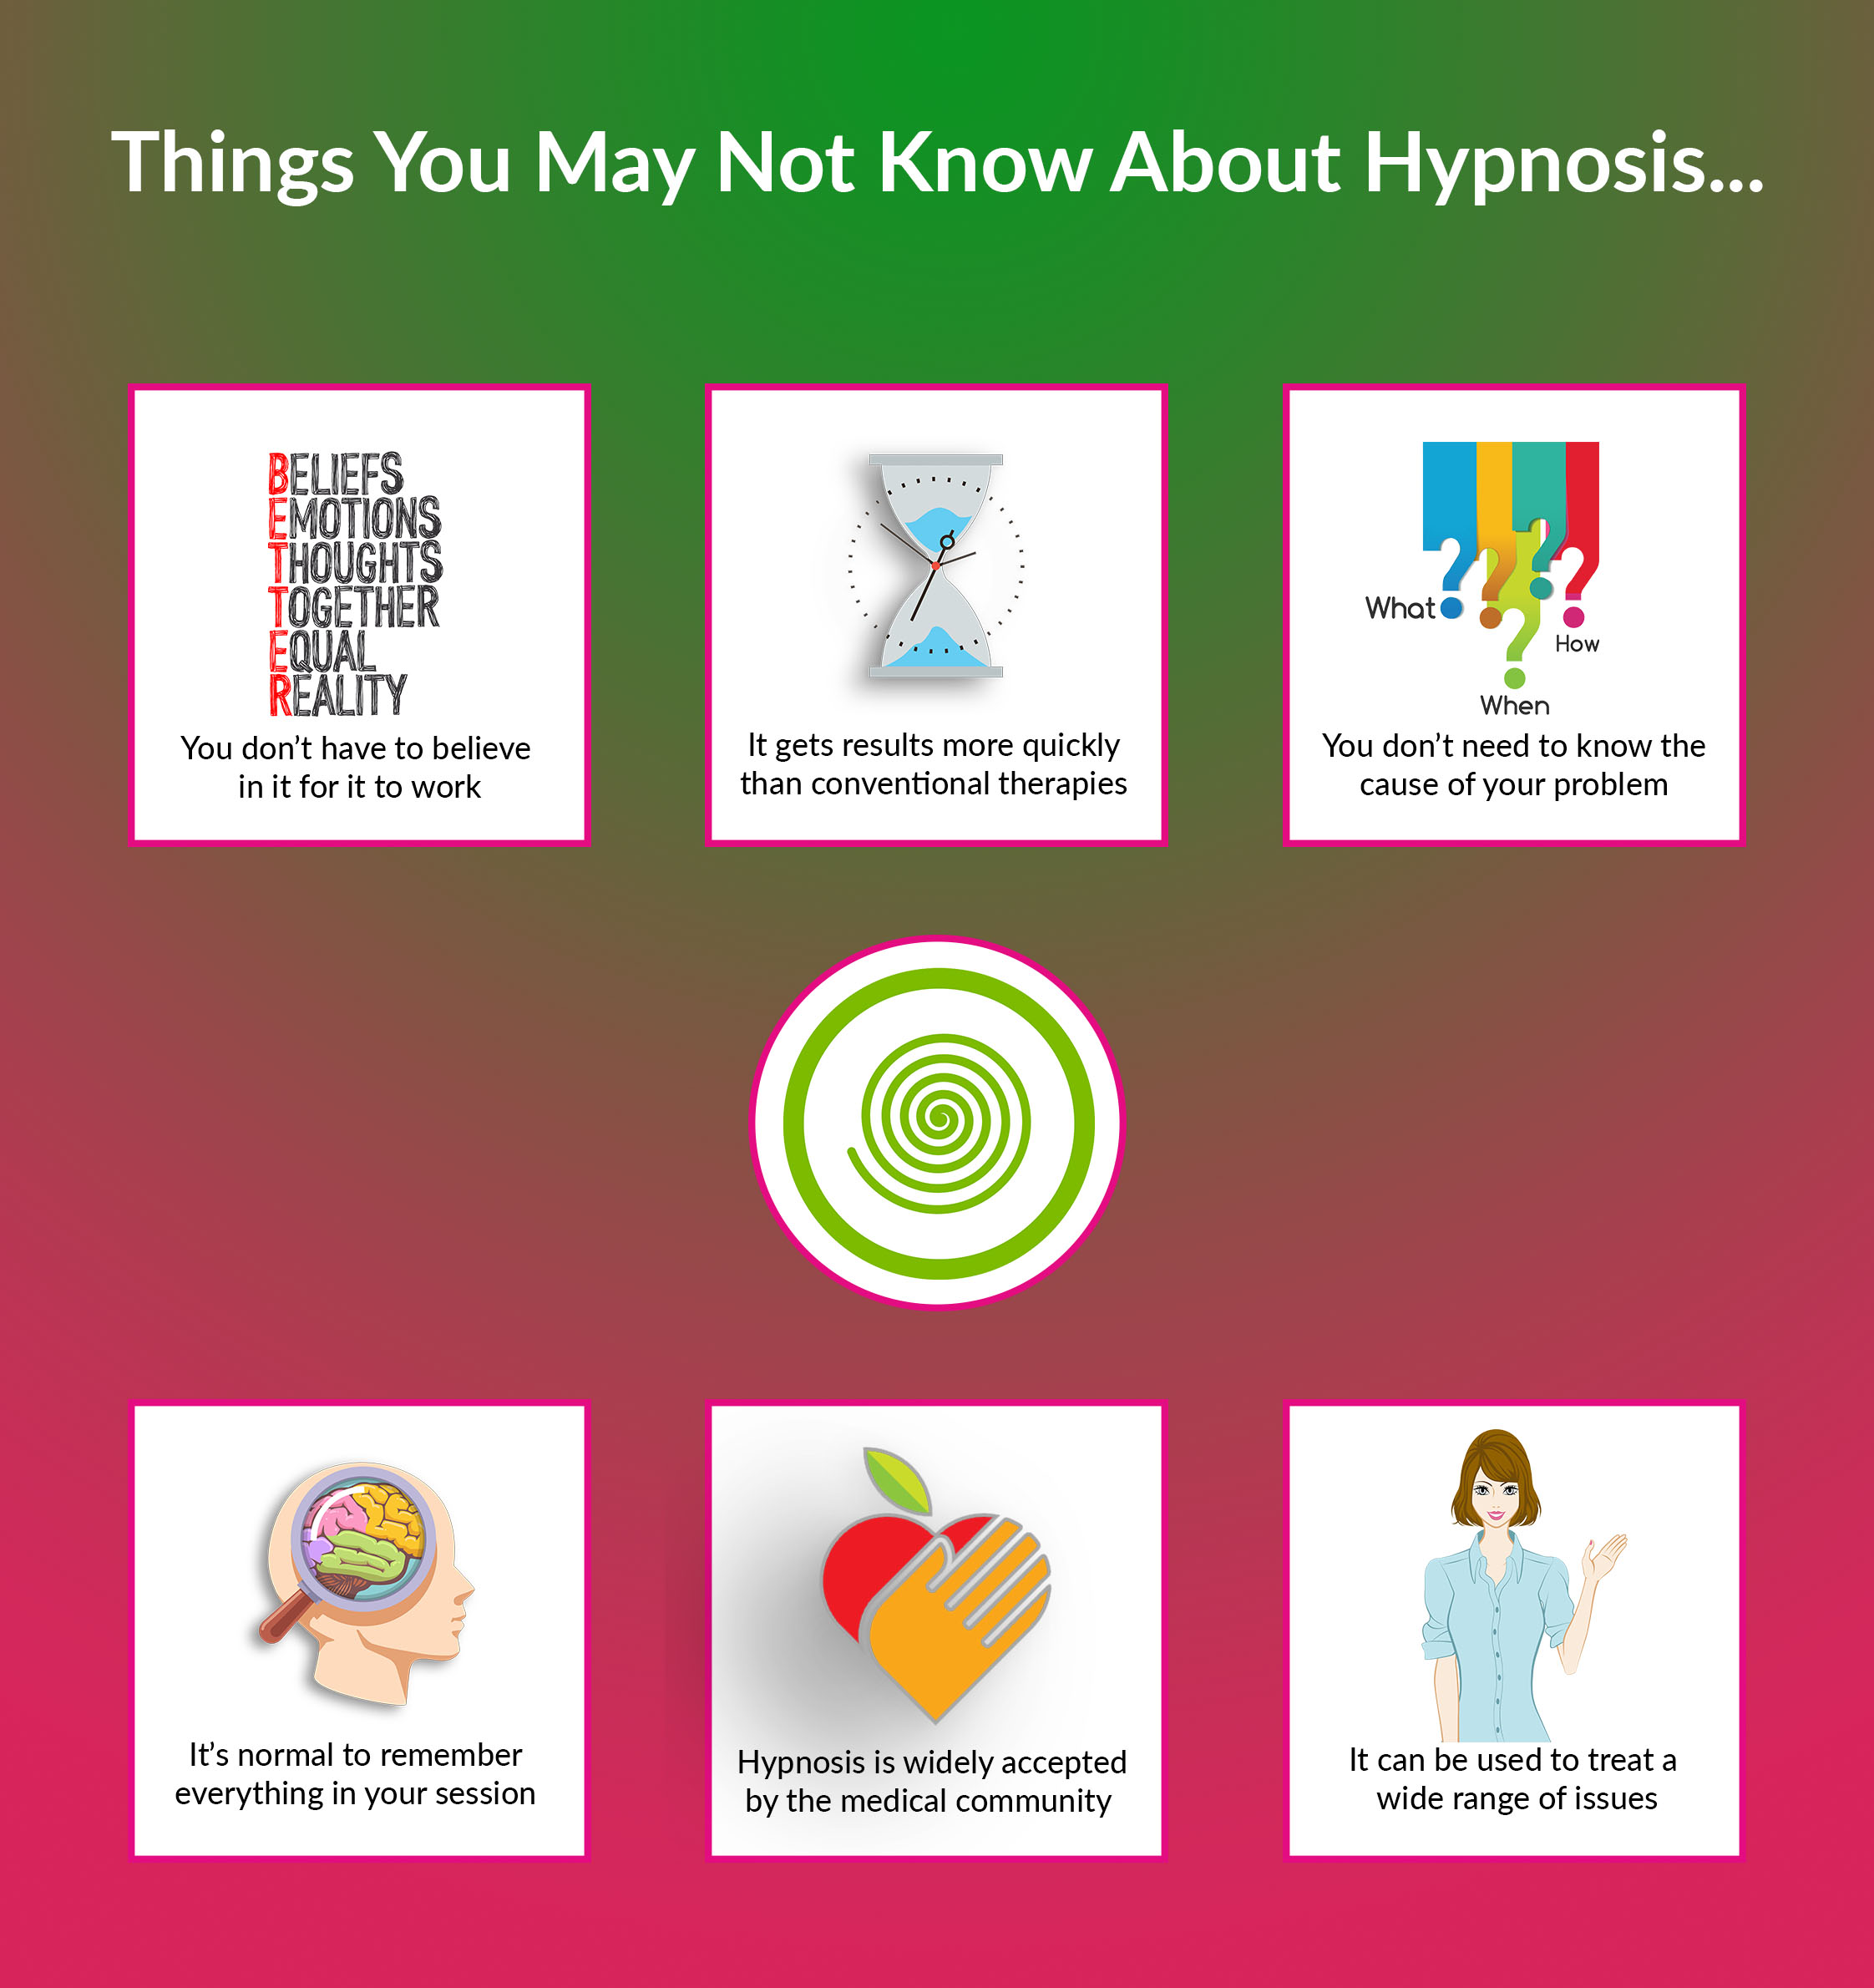 Interesting information about hypnotherapy